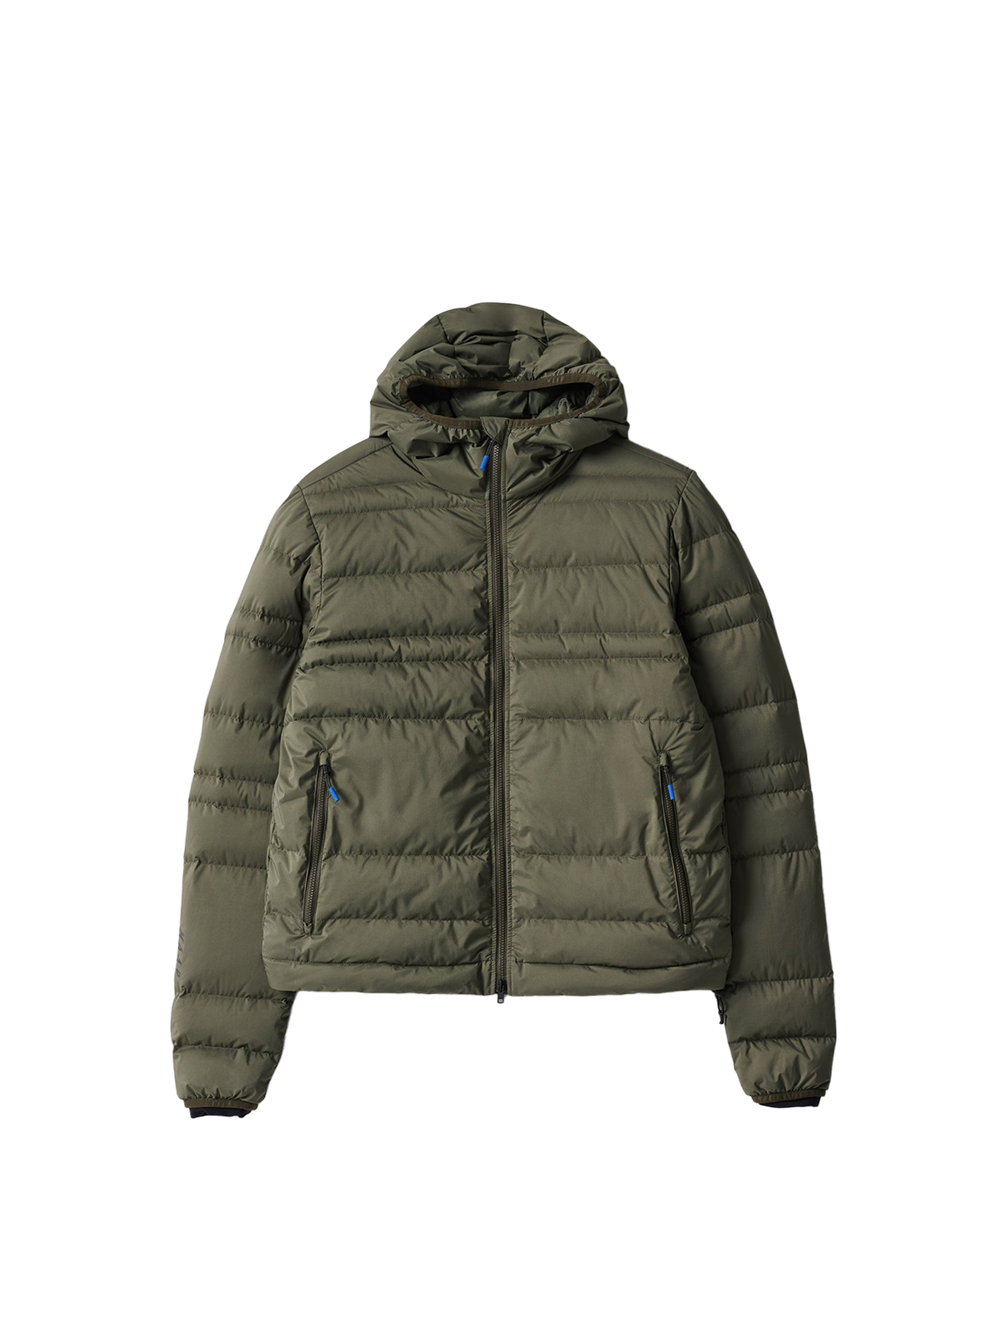 Product Image for Women's Transit Packable Puffer